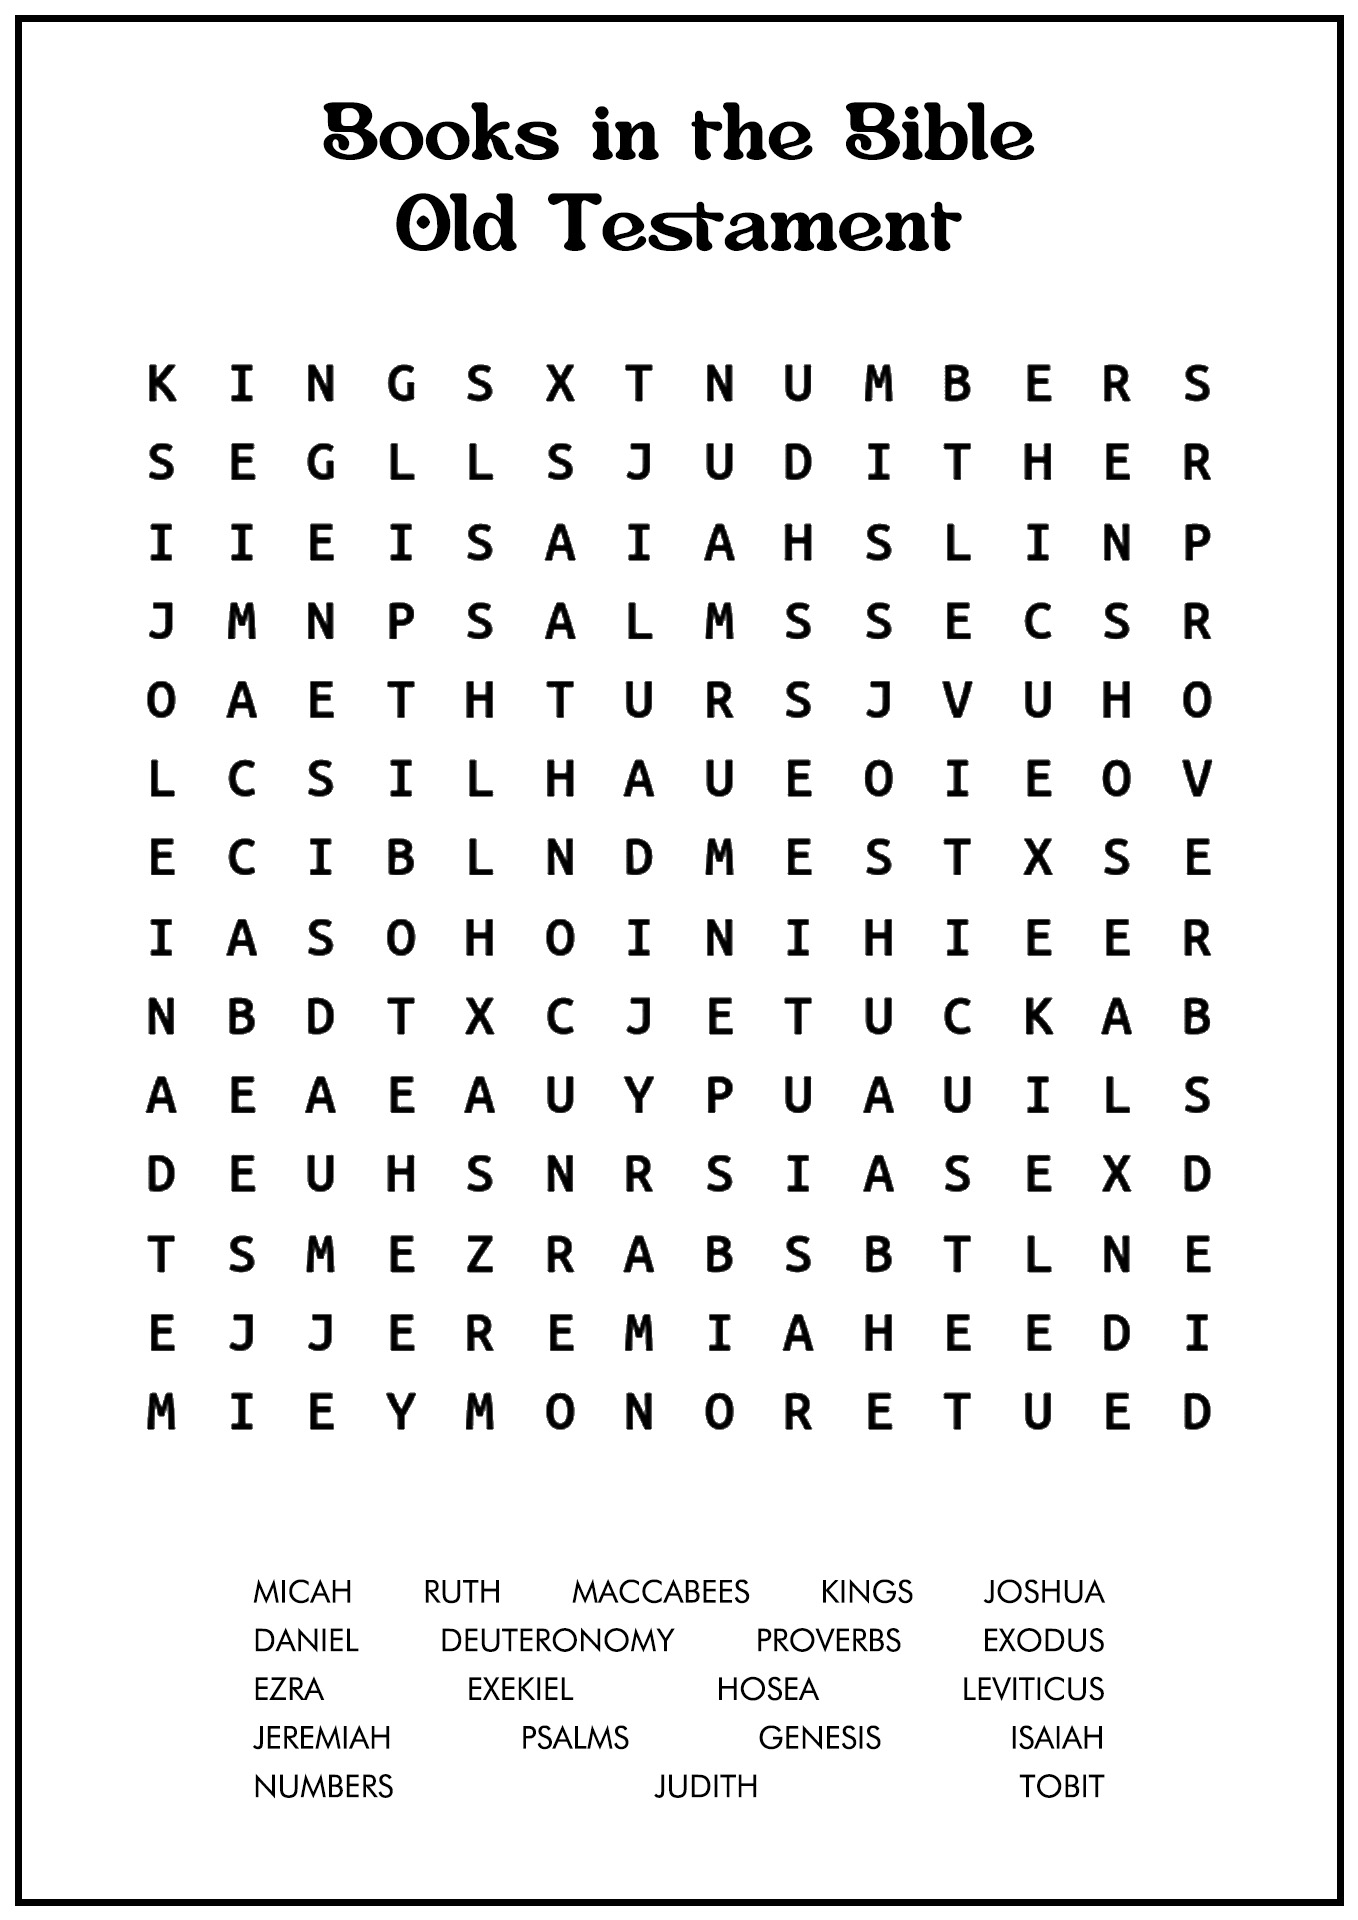 Books of the Bible Word Search Puzzles Printable Image